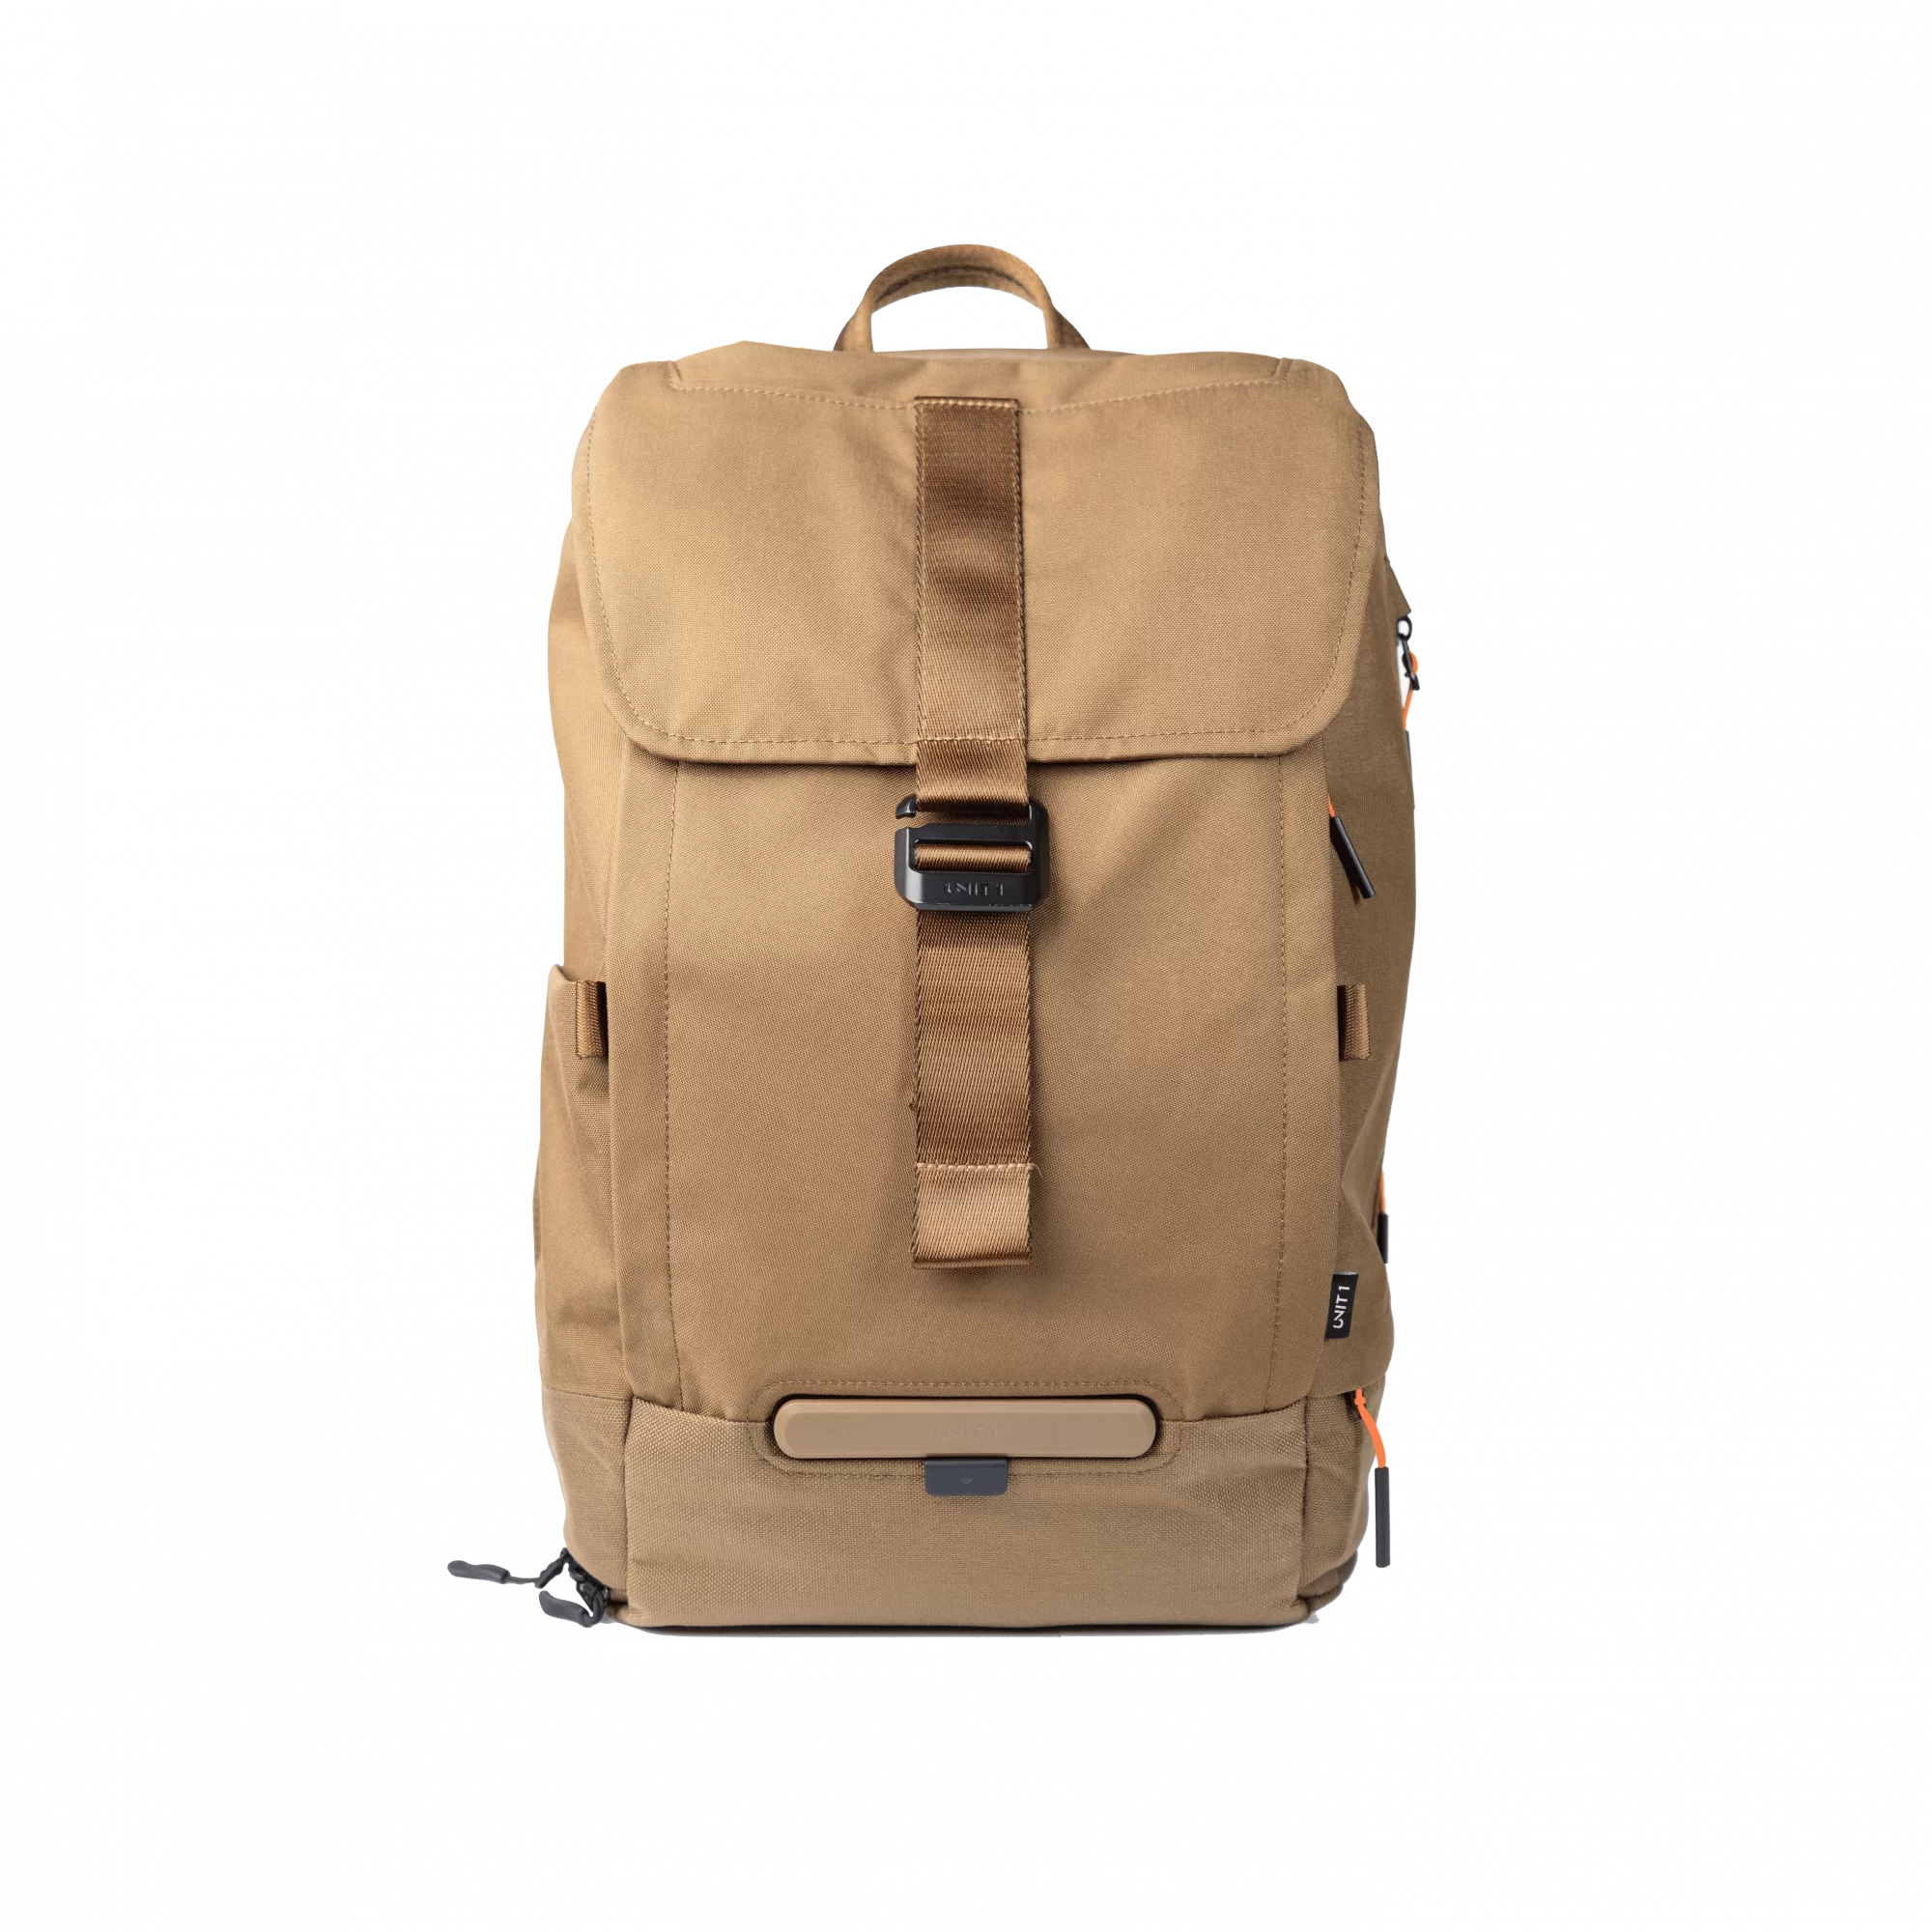 UNIT 1 Torch Backpack Tan